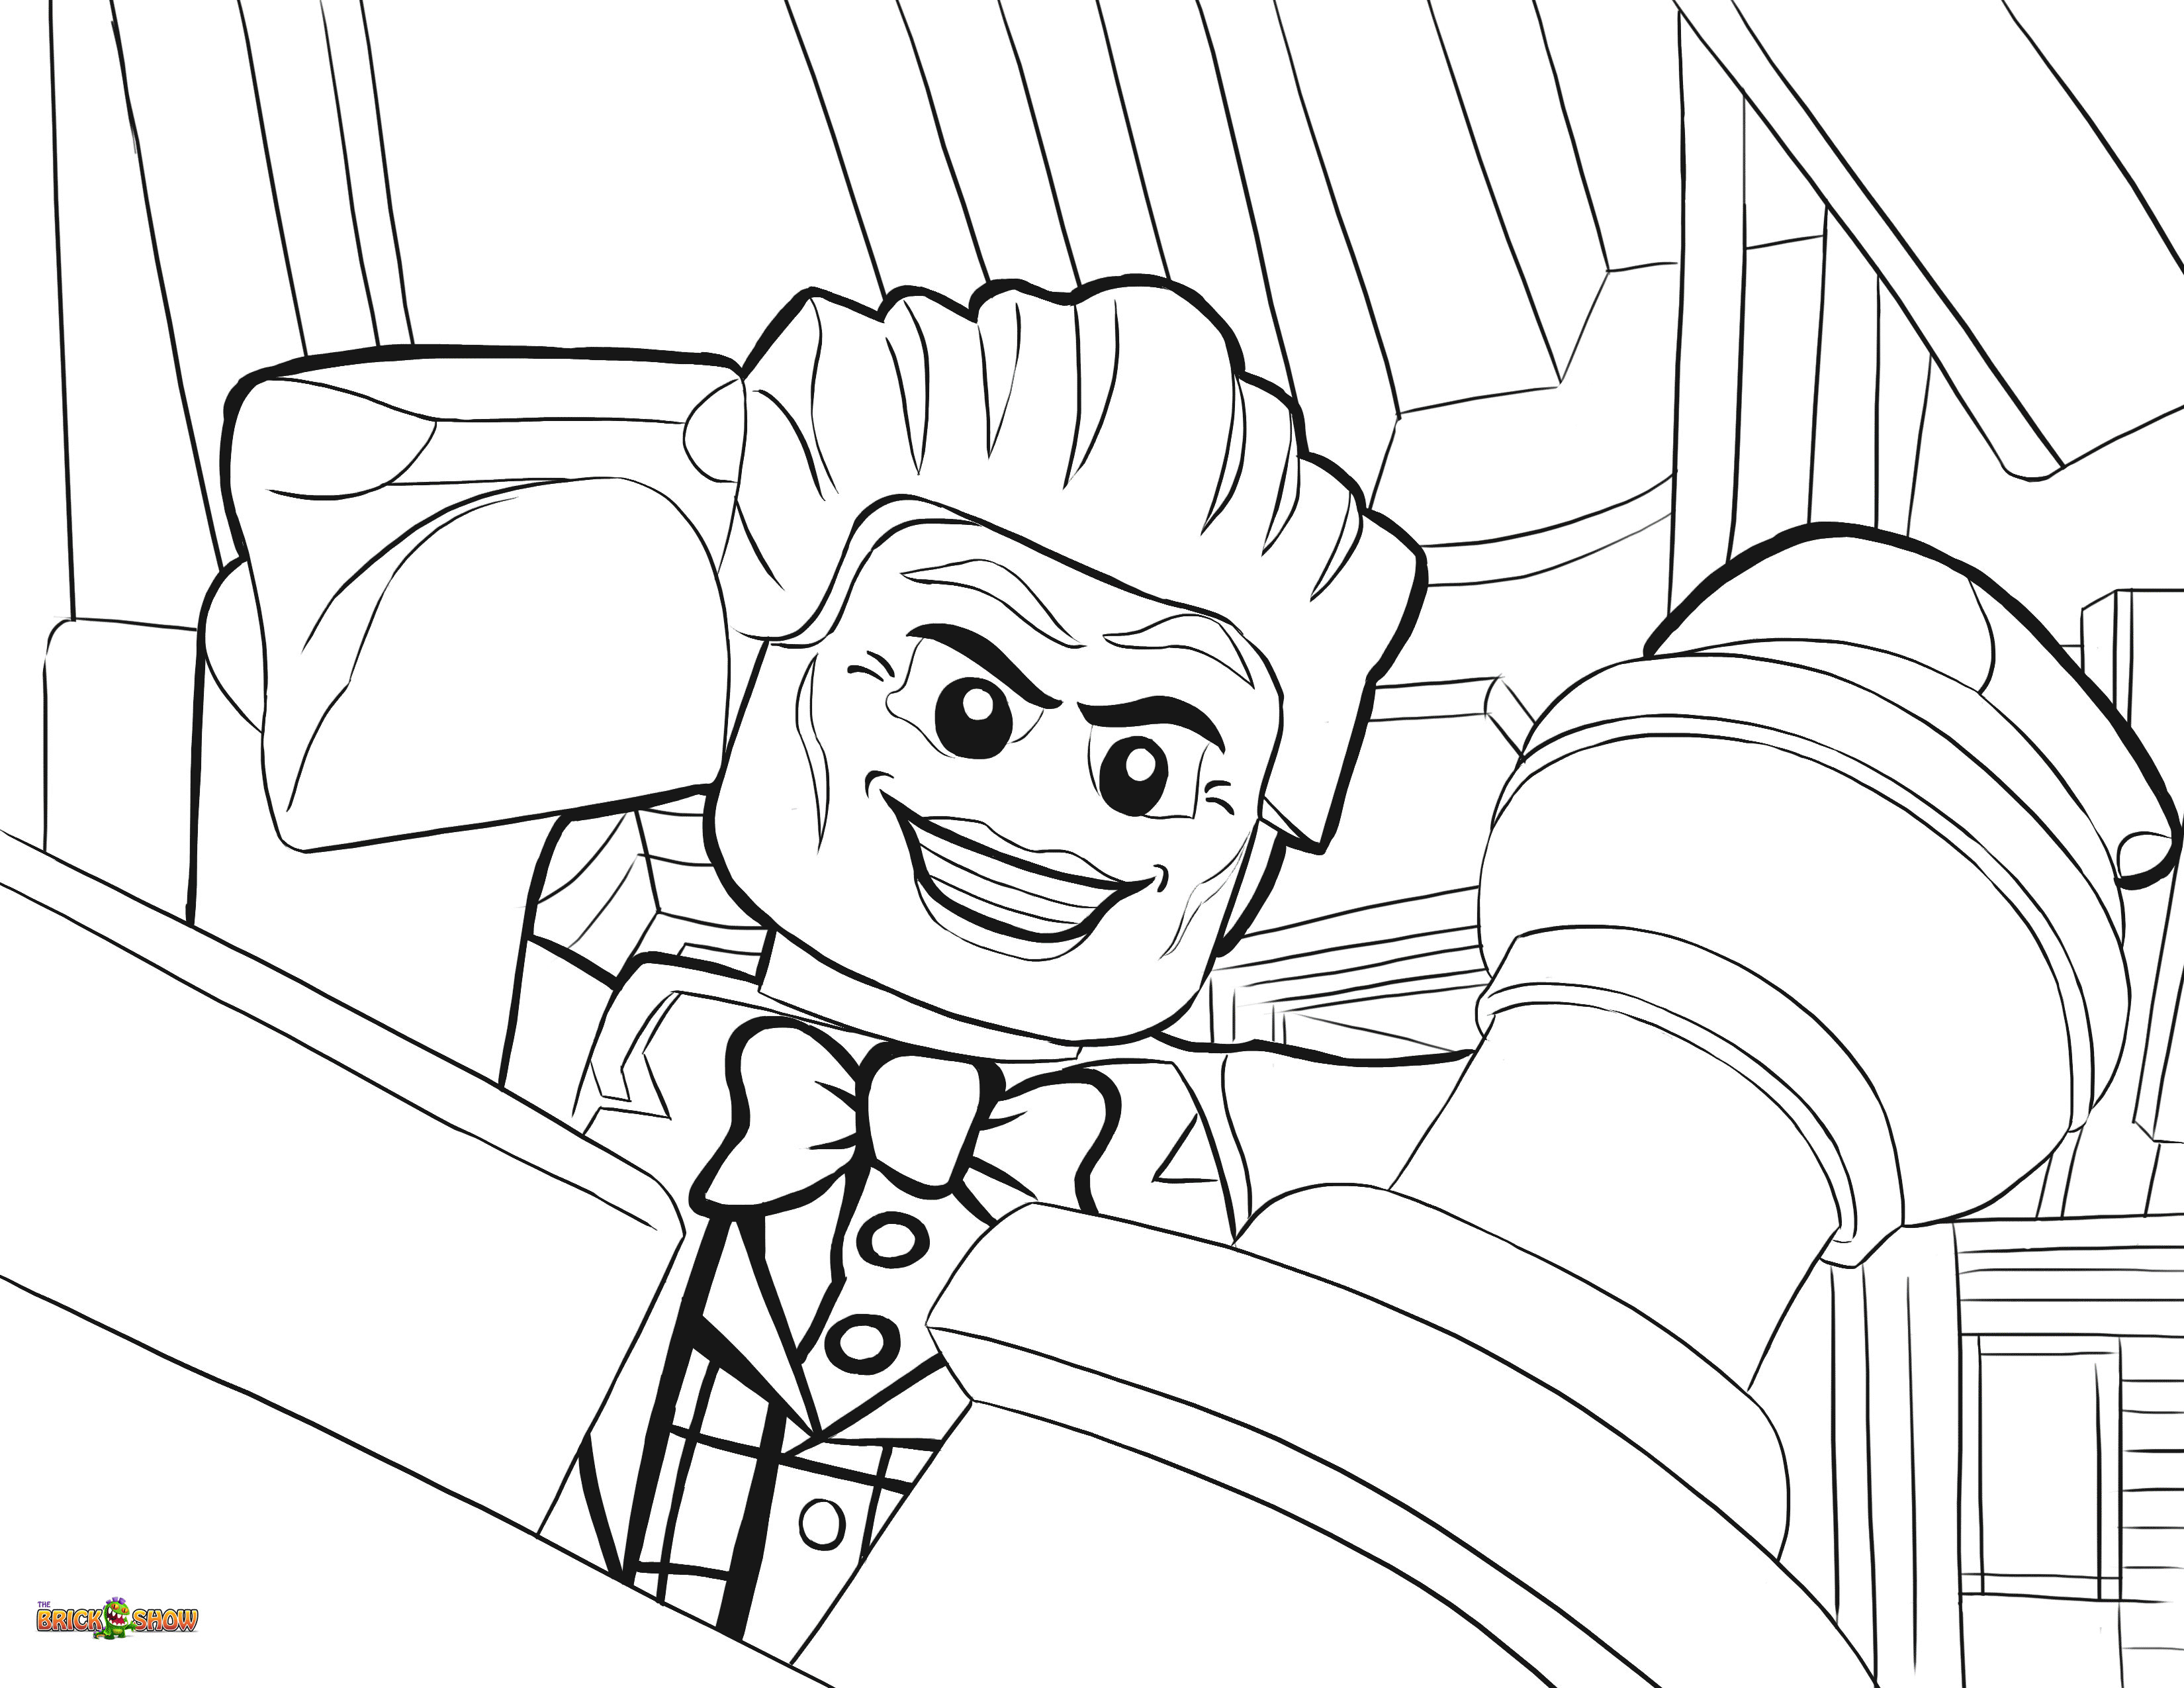 Download Lego Superhero Coloring Pages - Coloring Home